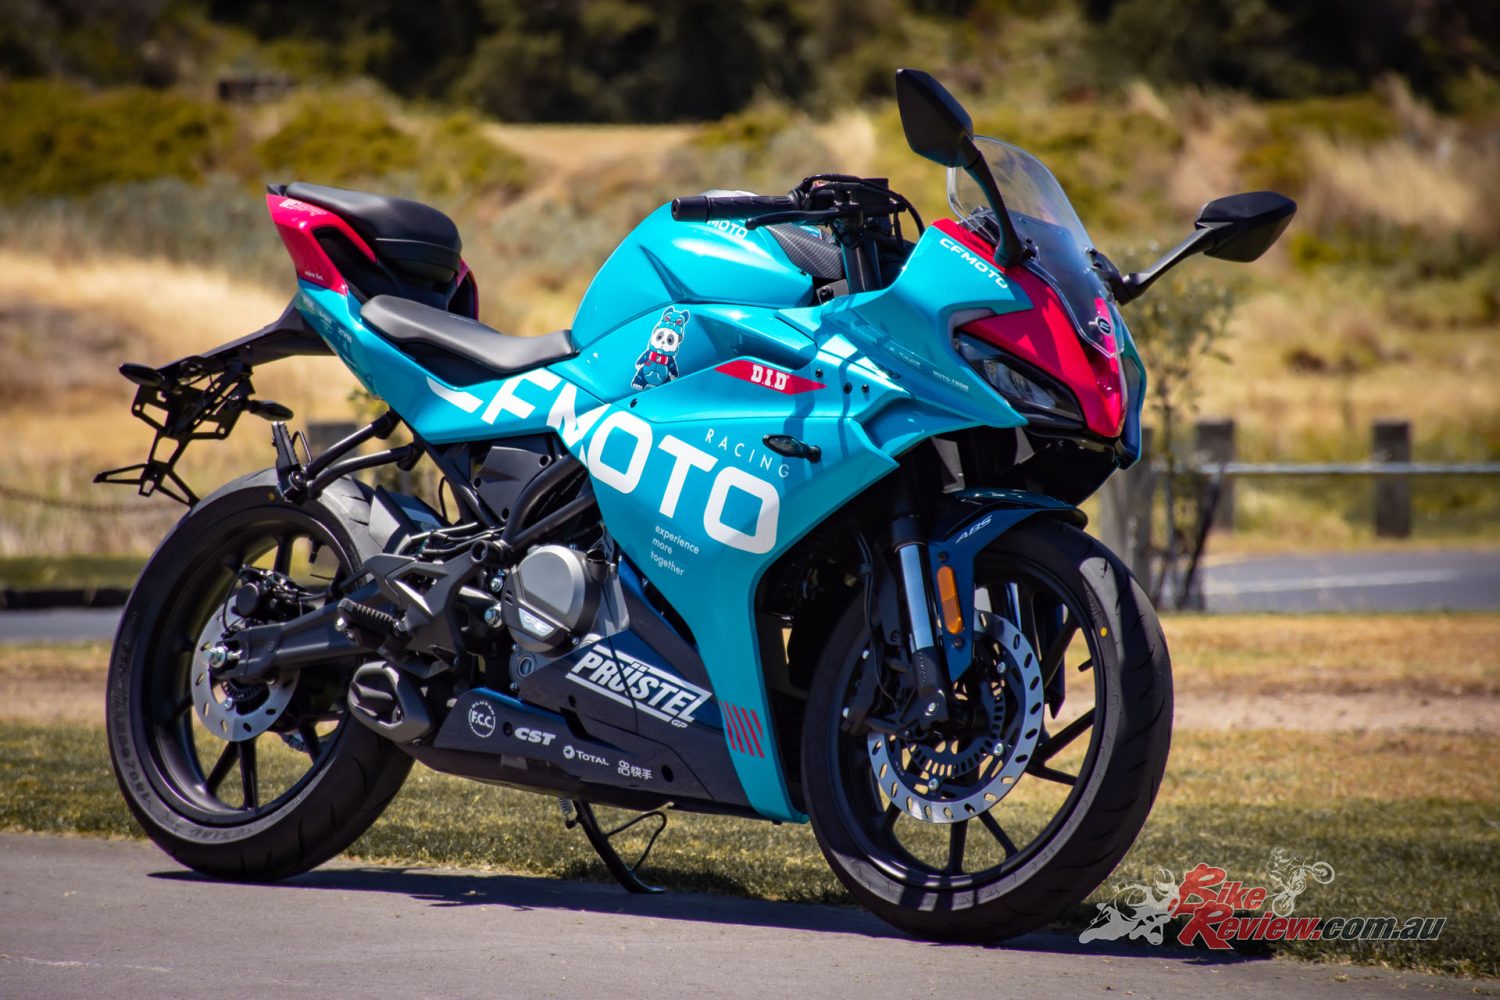 CFMOTO has released a special iteration of its first fully faired sports bike, the inimitable 300SR adorning the official PrüstelGP Moto3 team Tosca green, pink and blue livery.